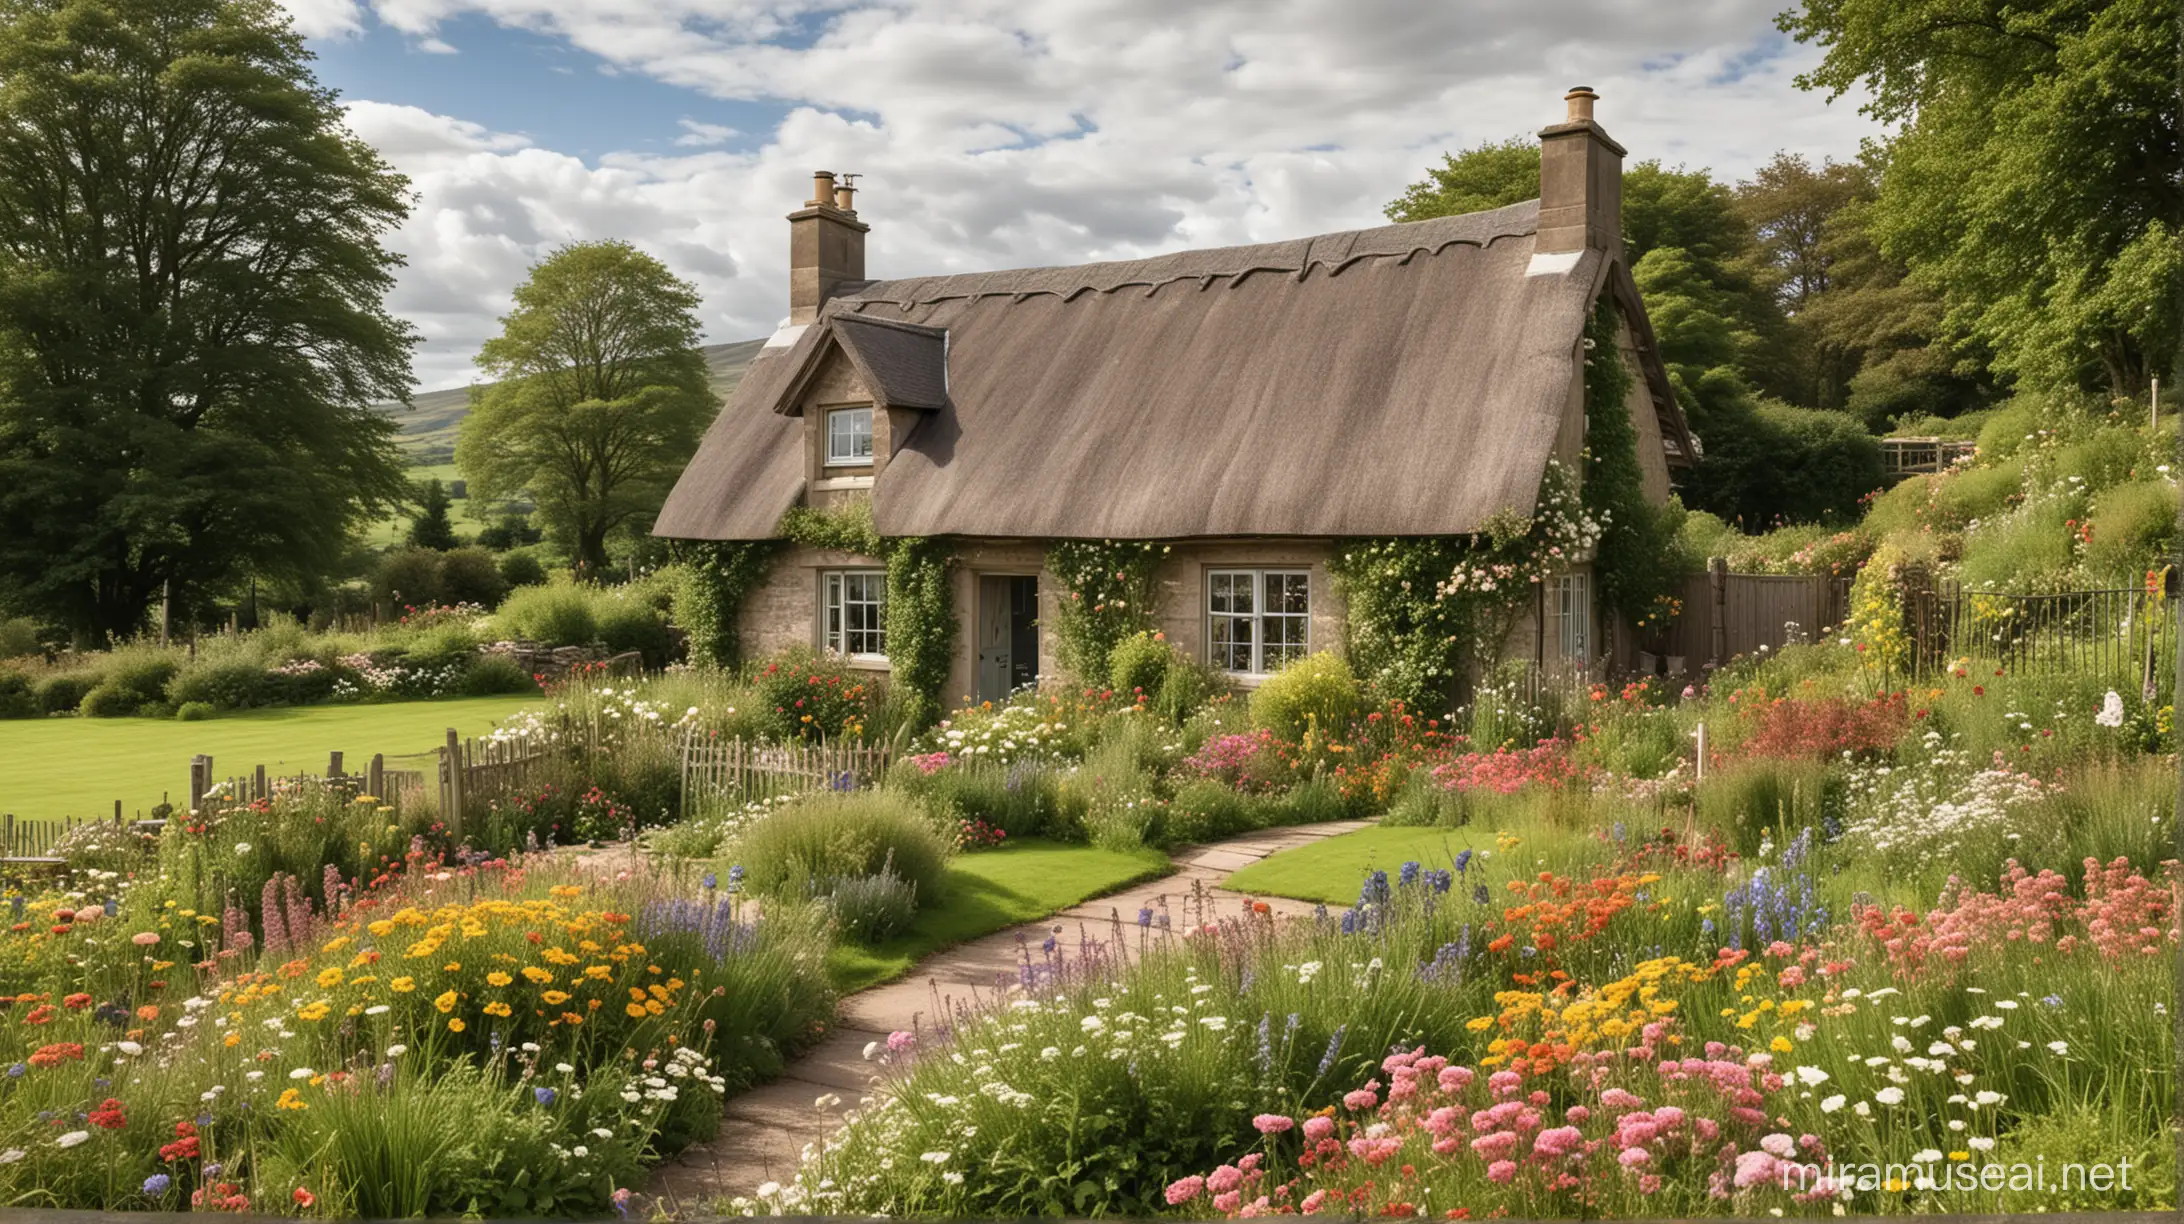 Picturesque Scottish Cottage Surrounded by FlowerCovered Gardens and Fields